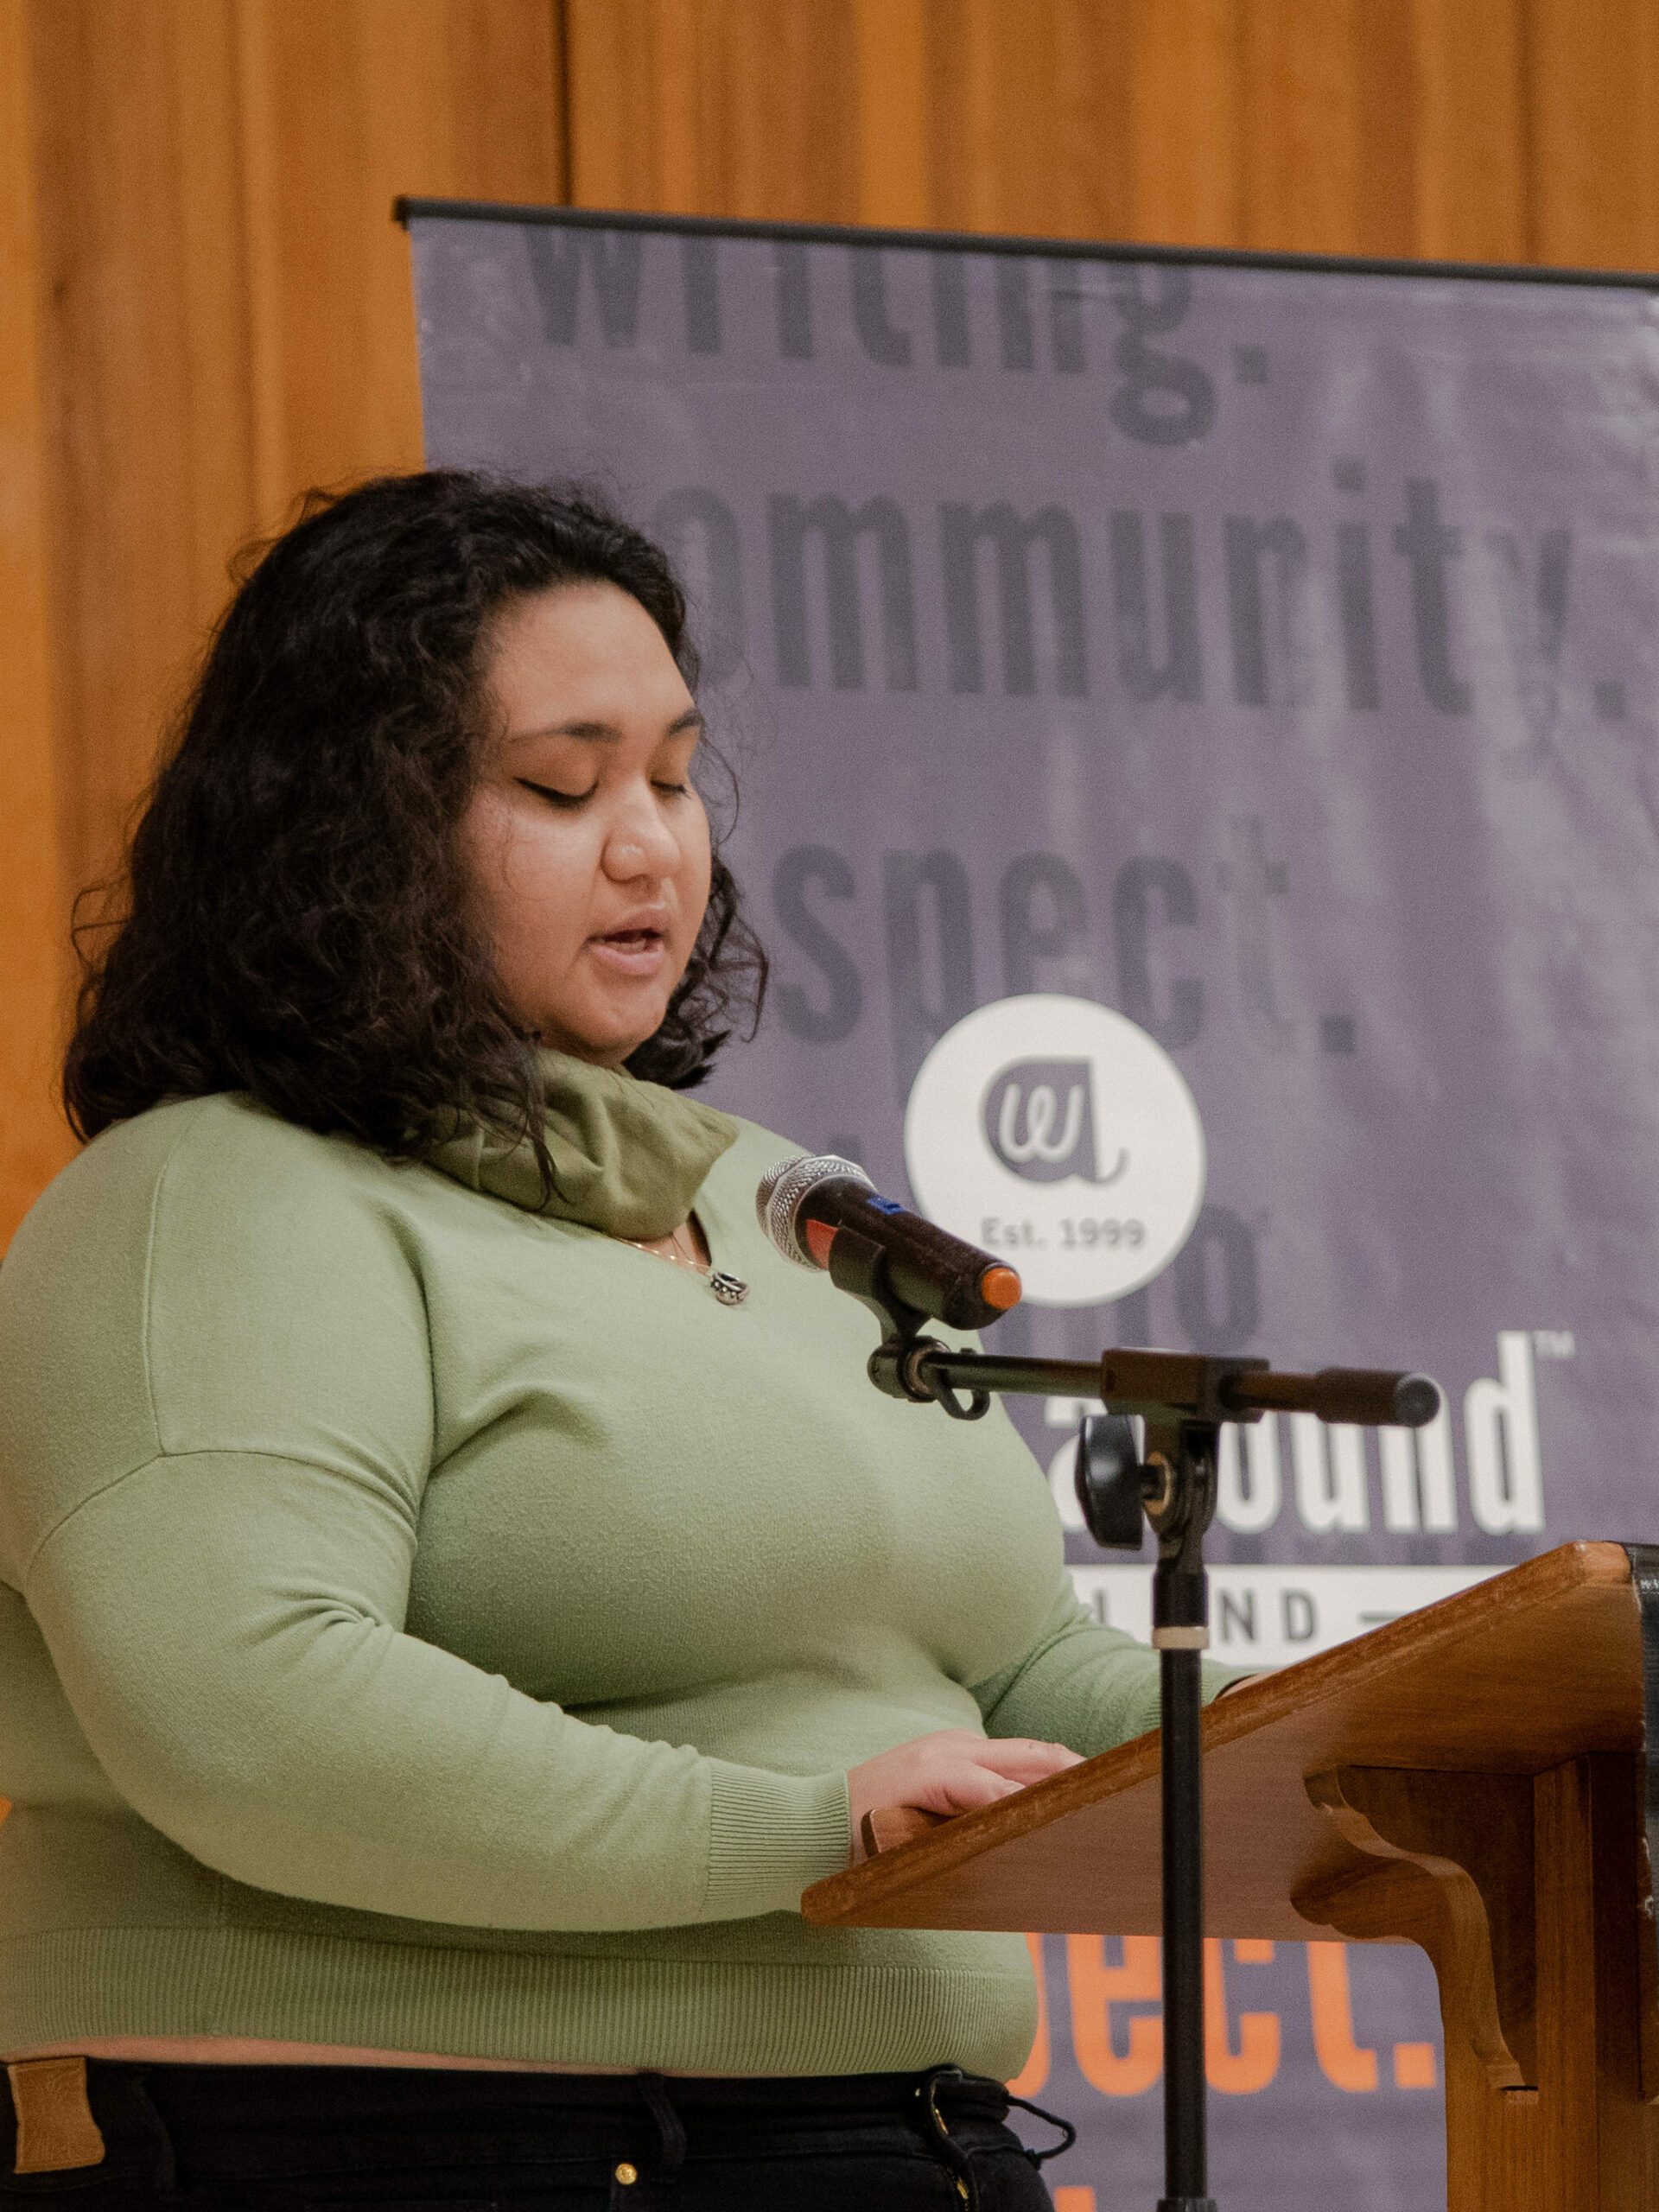 A woman in a sage green shirt reads from her published piece at a microphone.